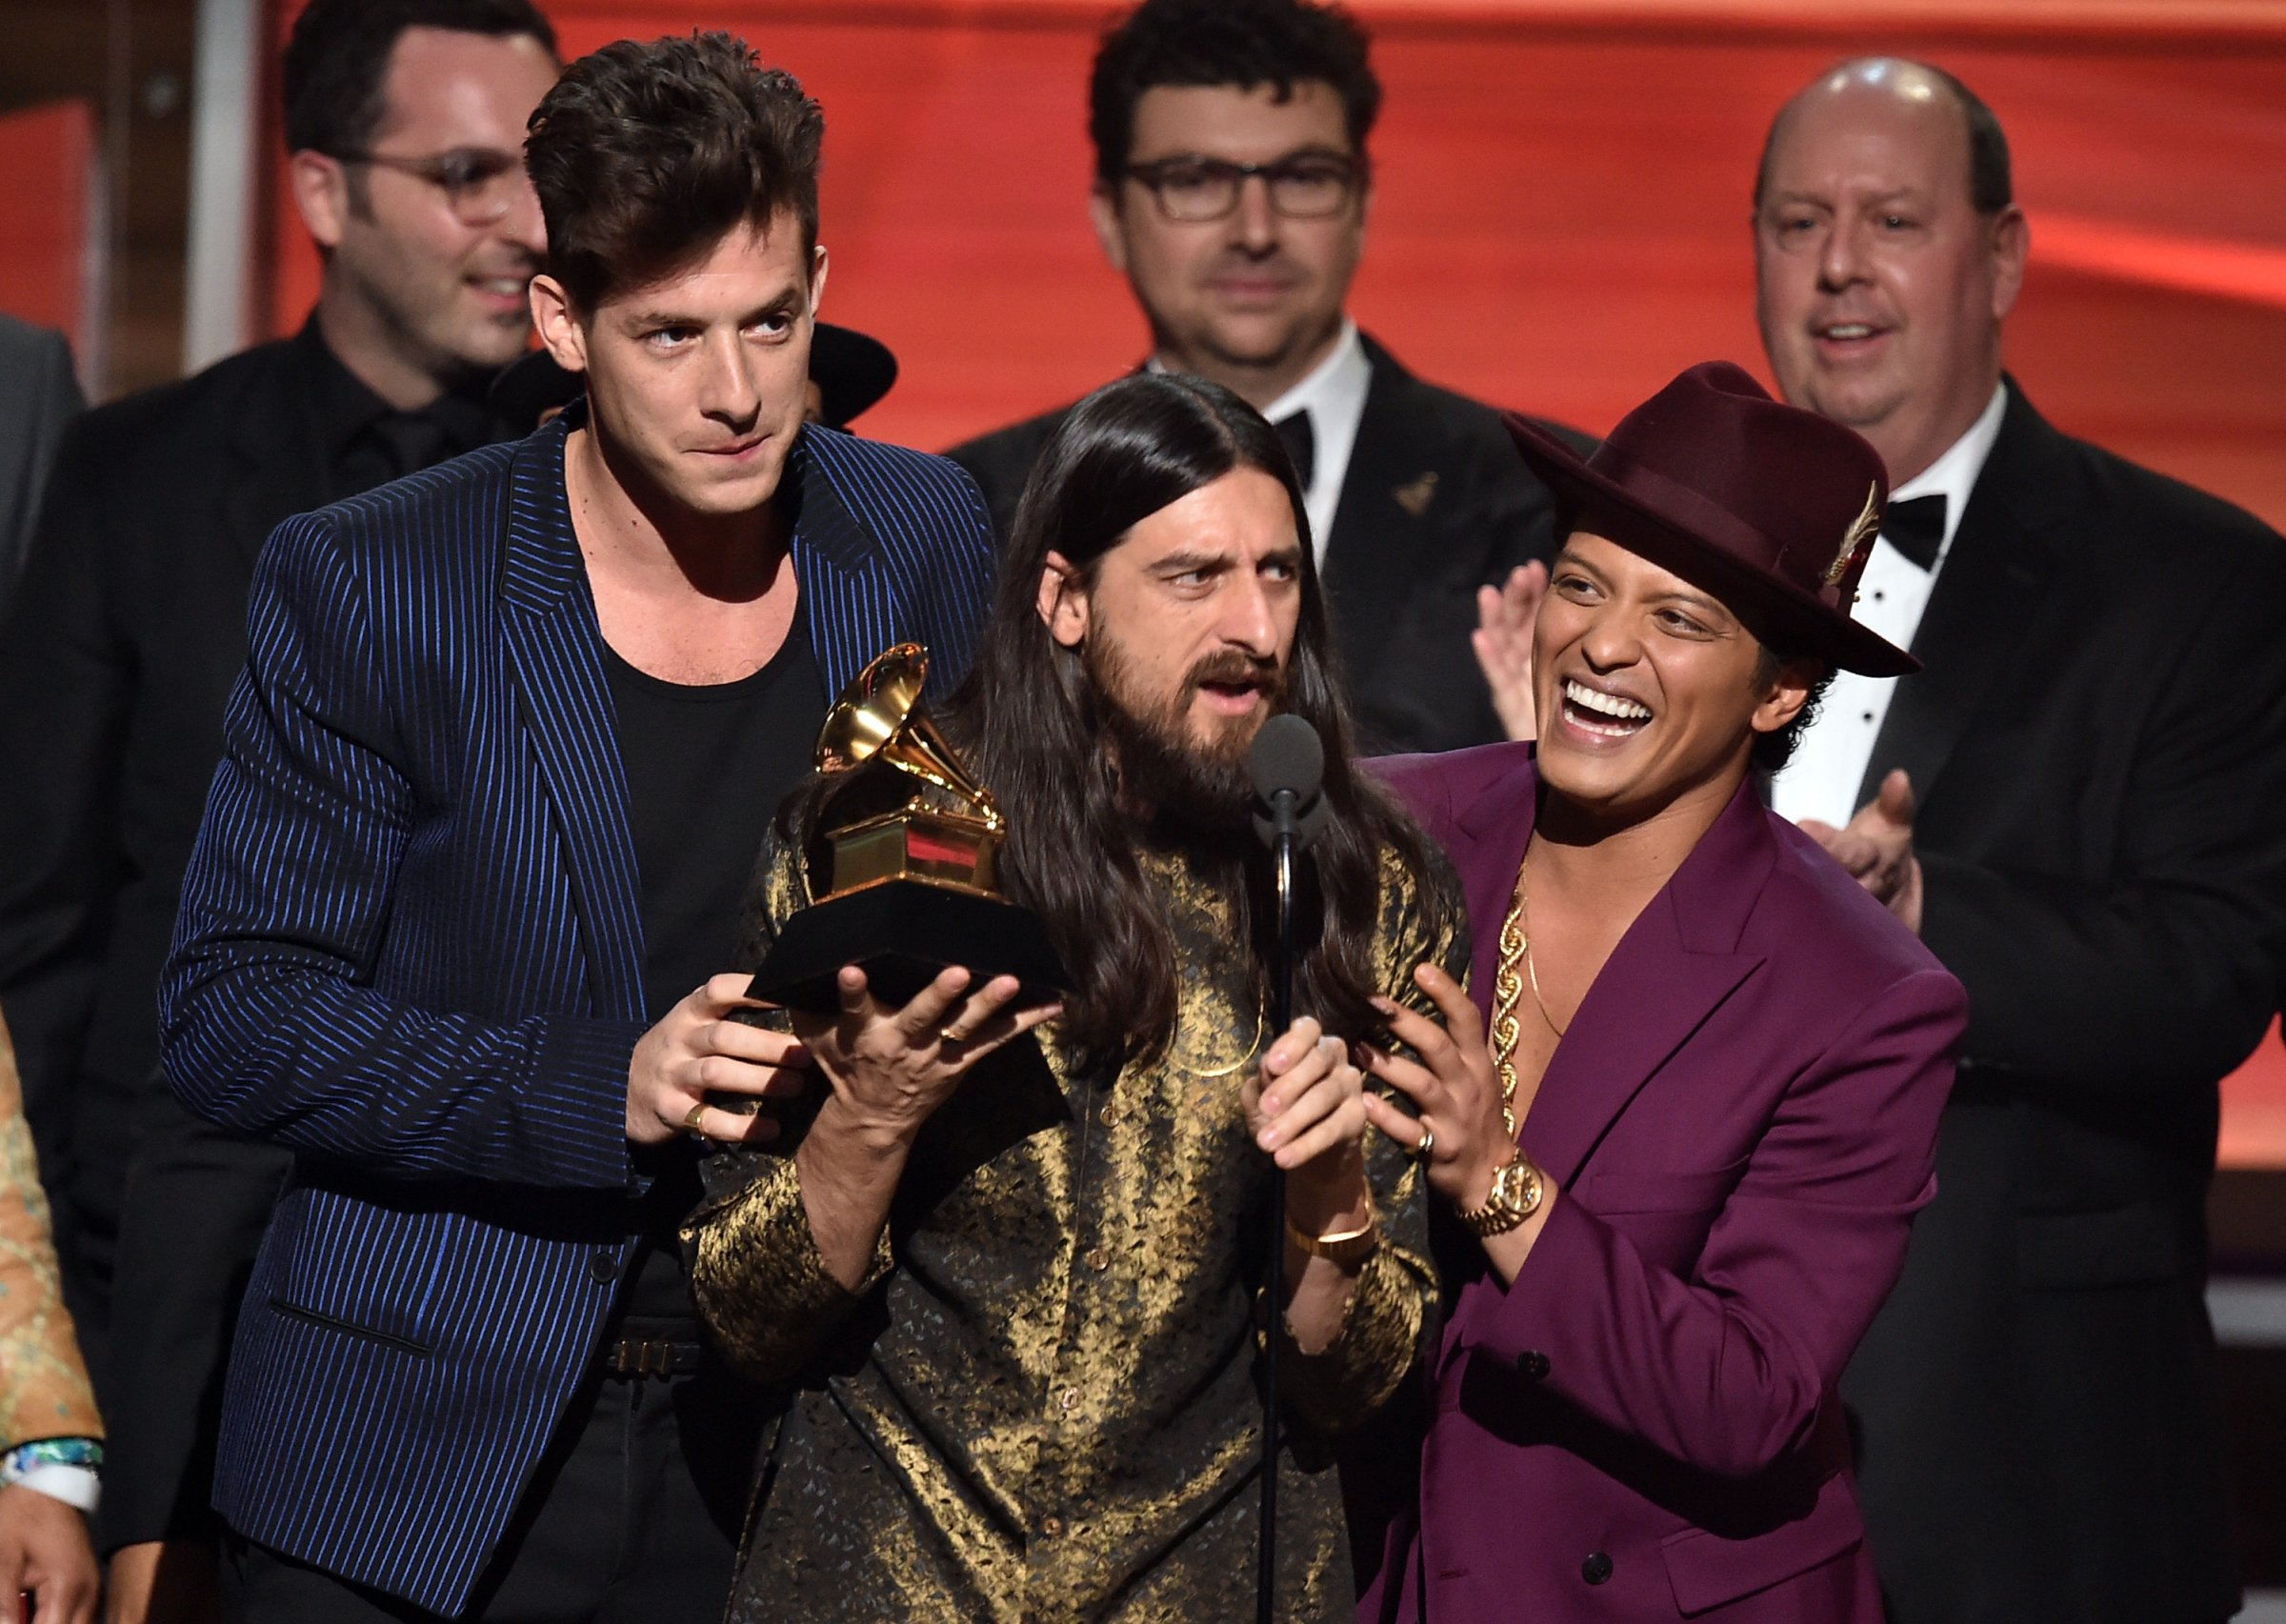 From left: Mark Ronson, Jeff Bhasker, and Bruno Mars accept "Record Of The Year" during the 58th GRAMMY Awards at Staples Center on Feb. 15, 2016 in Los Angeles.